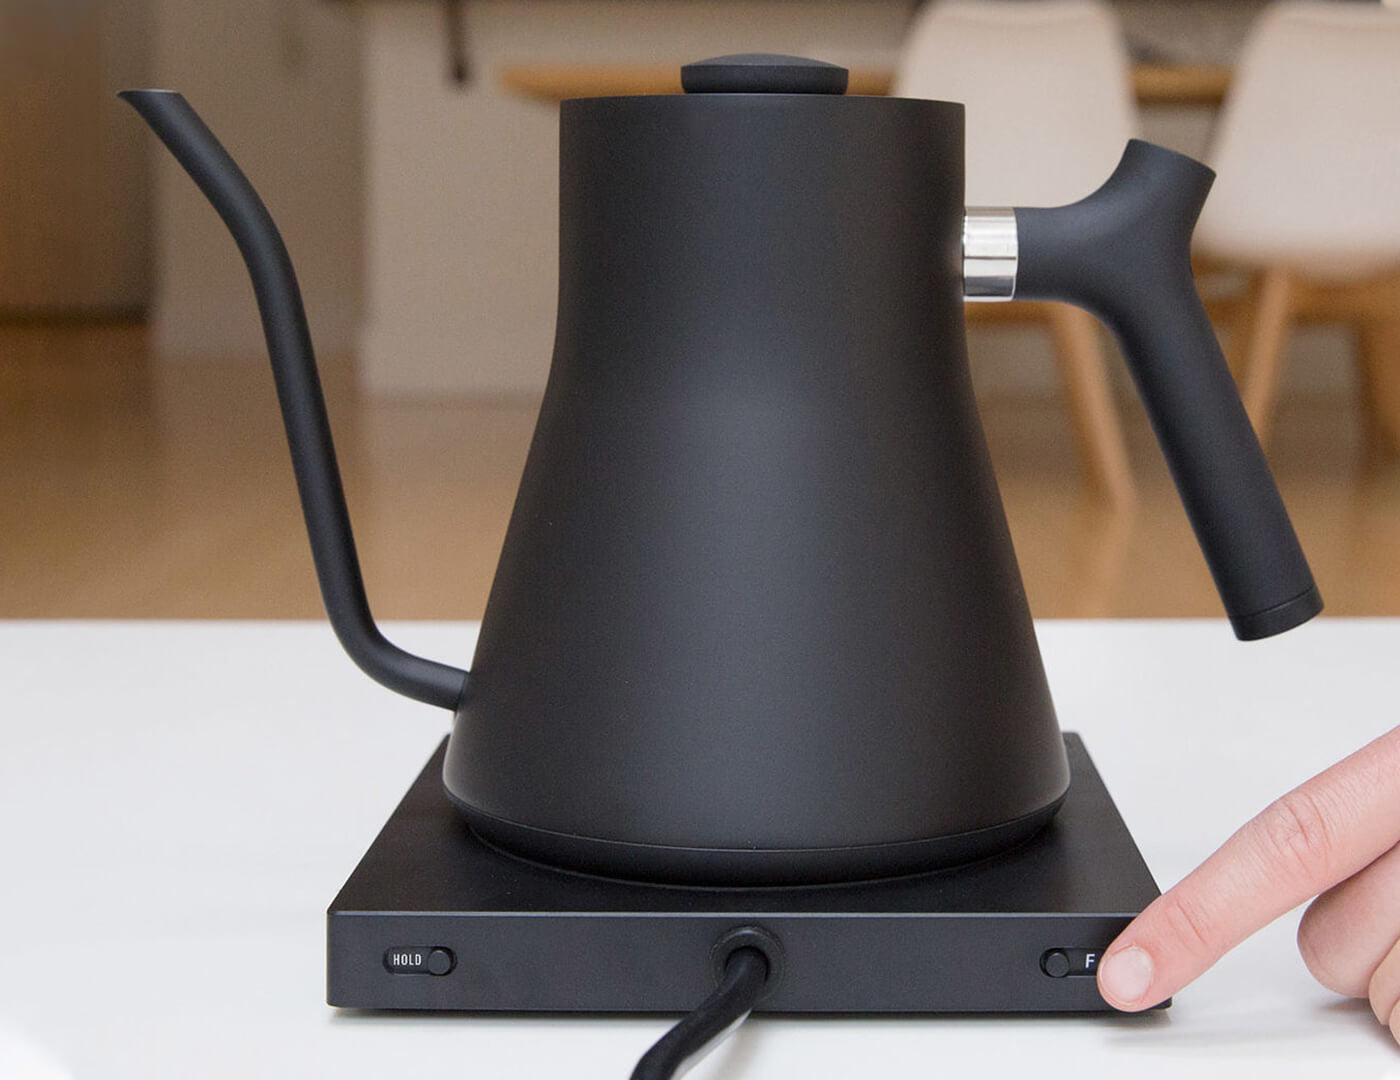 Stagg electric kettle in black showing temperature control